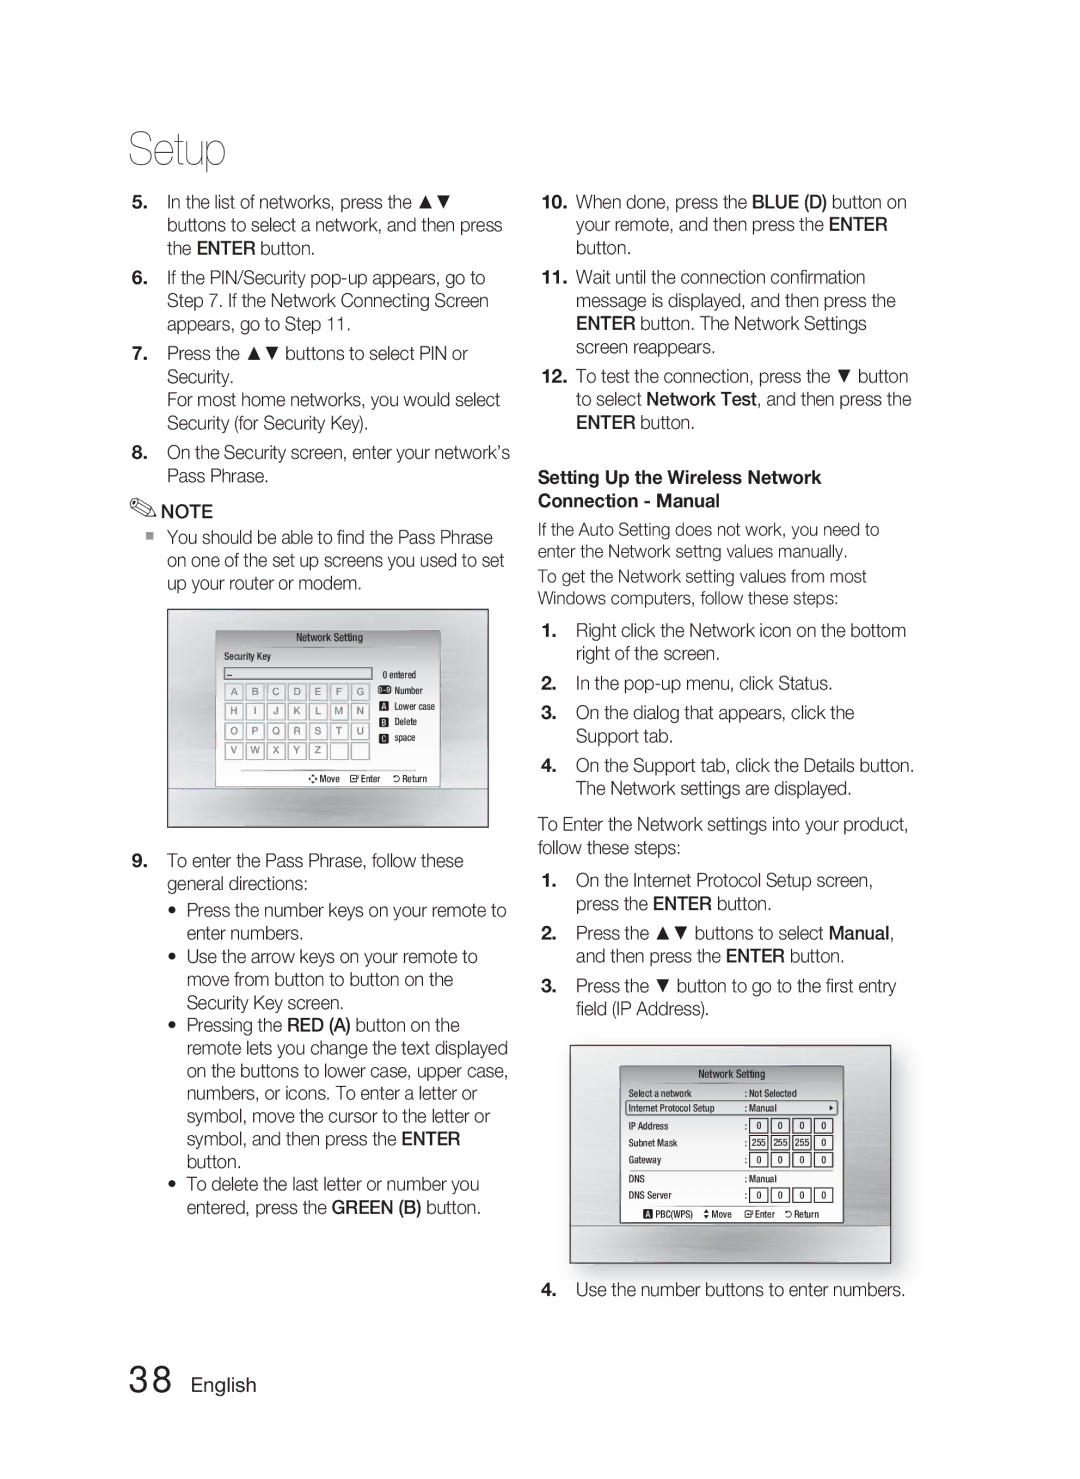 Samsung HT-C5800/XEE manual Setting Up the Wireless Network Connection Manual, Use the number buttons to enter numbers 